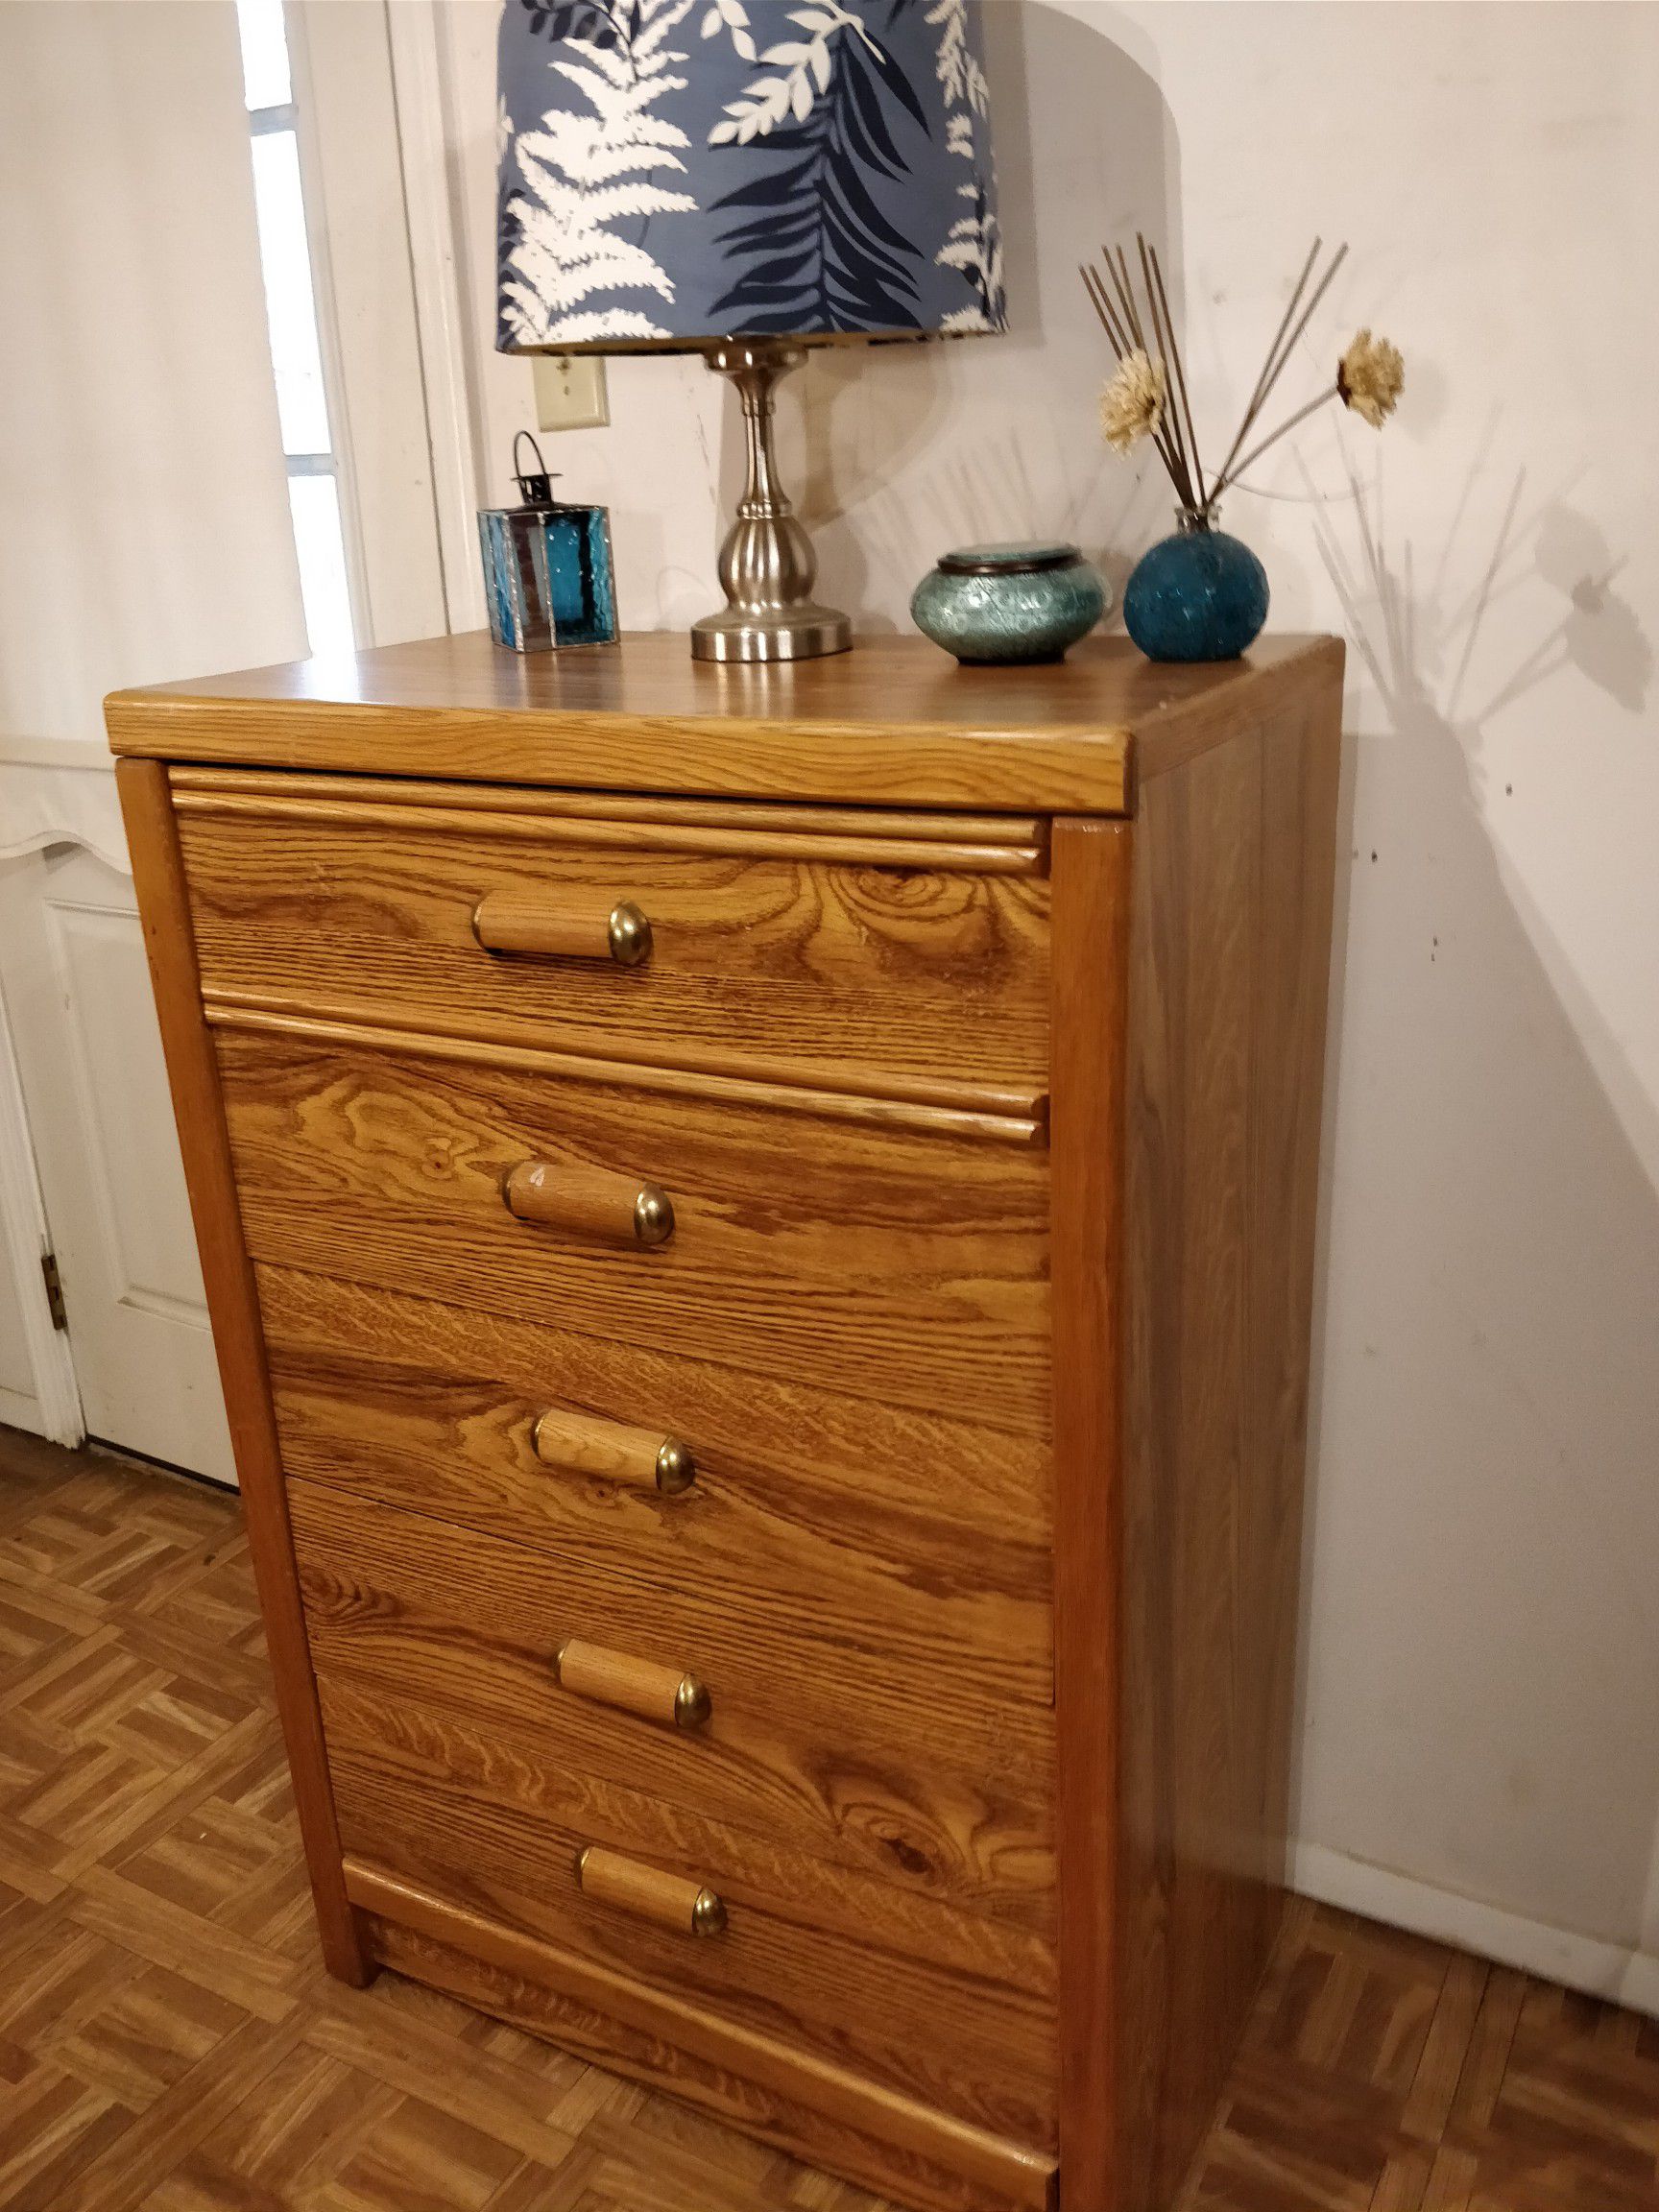 Like new chest dresser with 5 drawers in very good condition, pet free smoke free. L29.5"*W16.5"*H45"